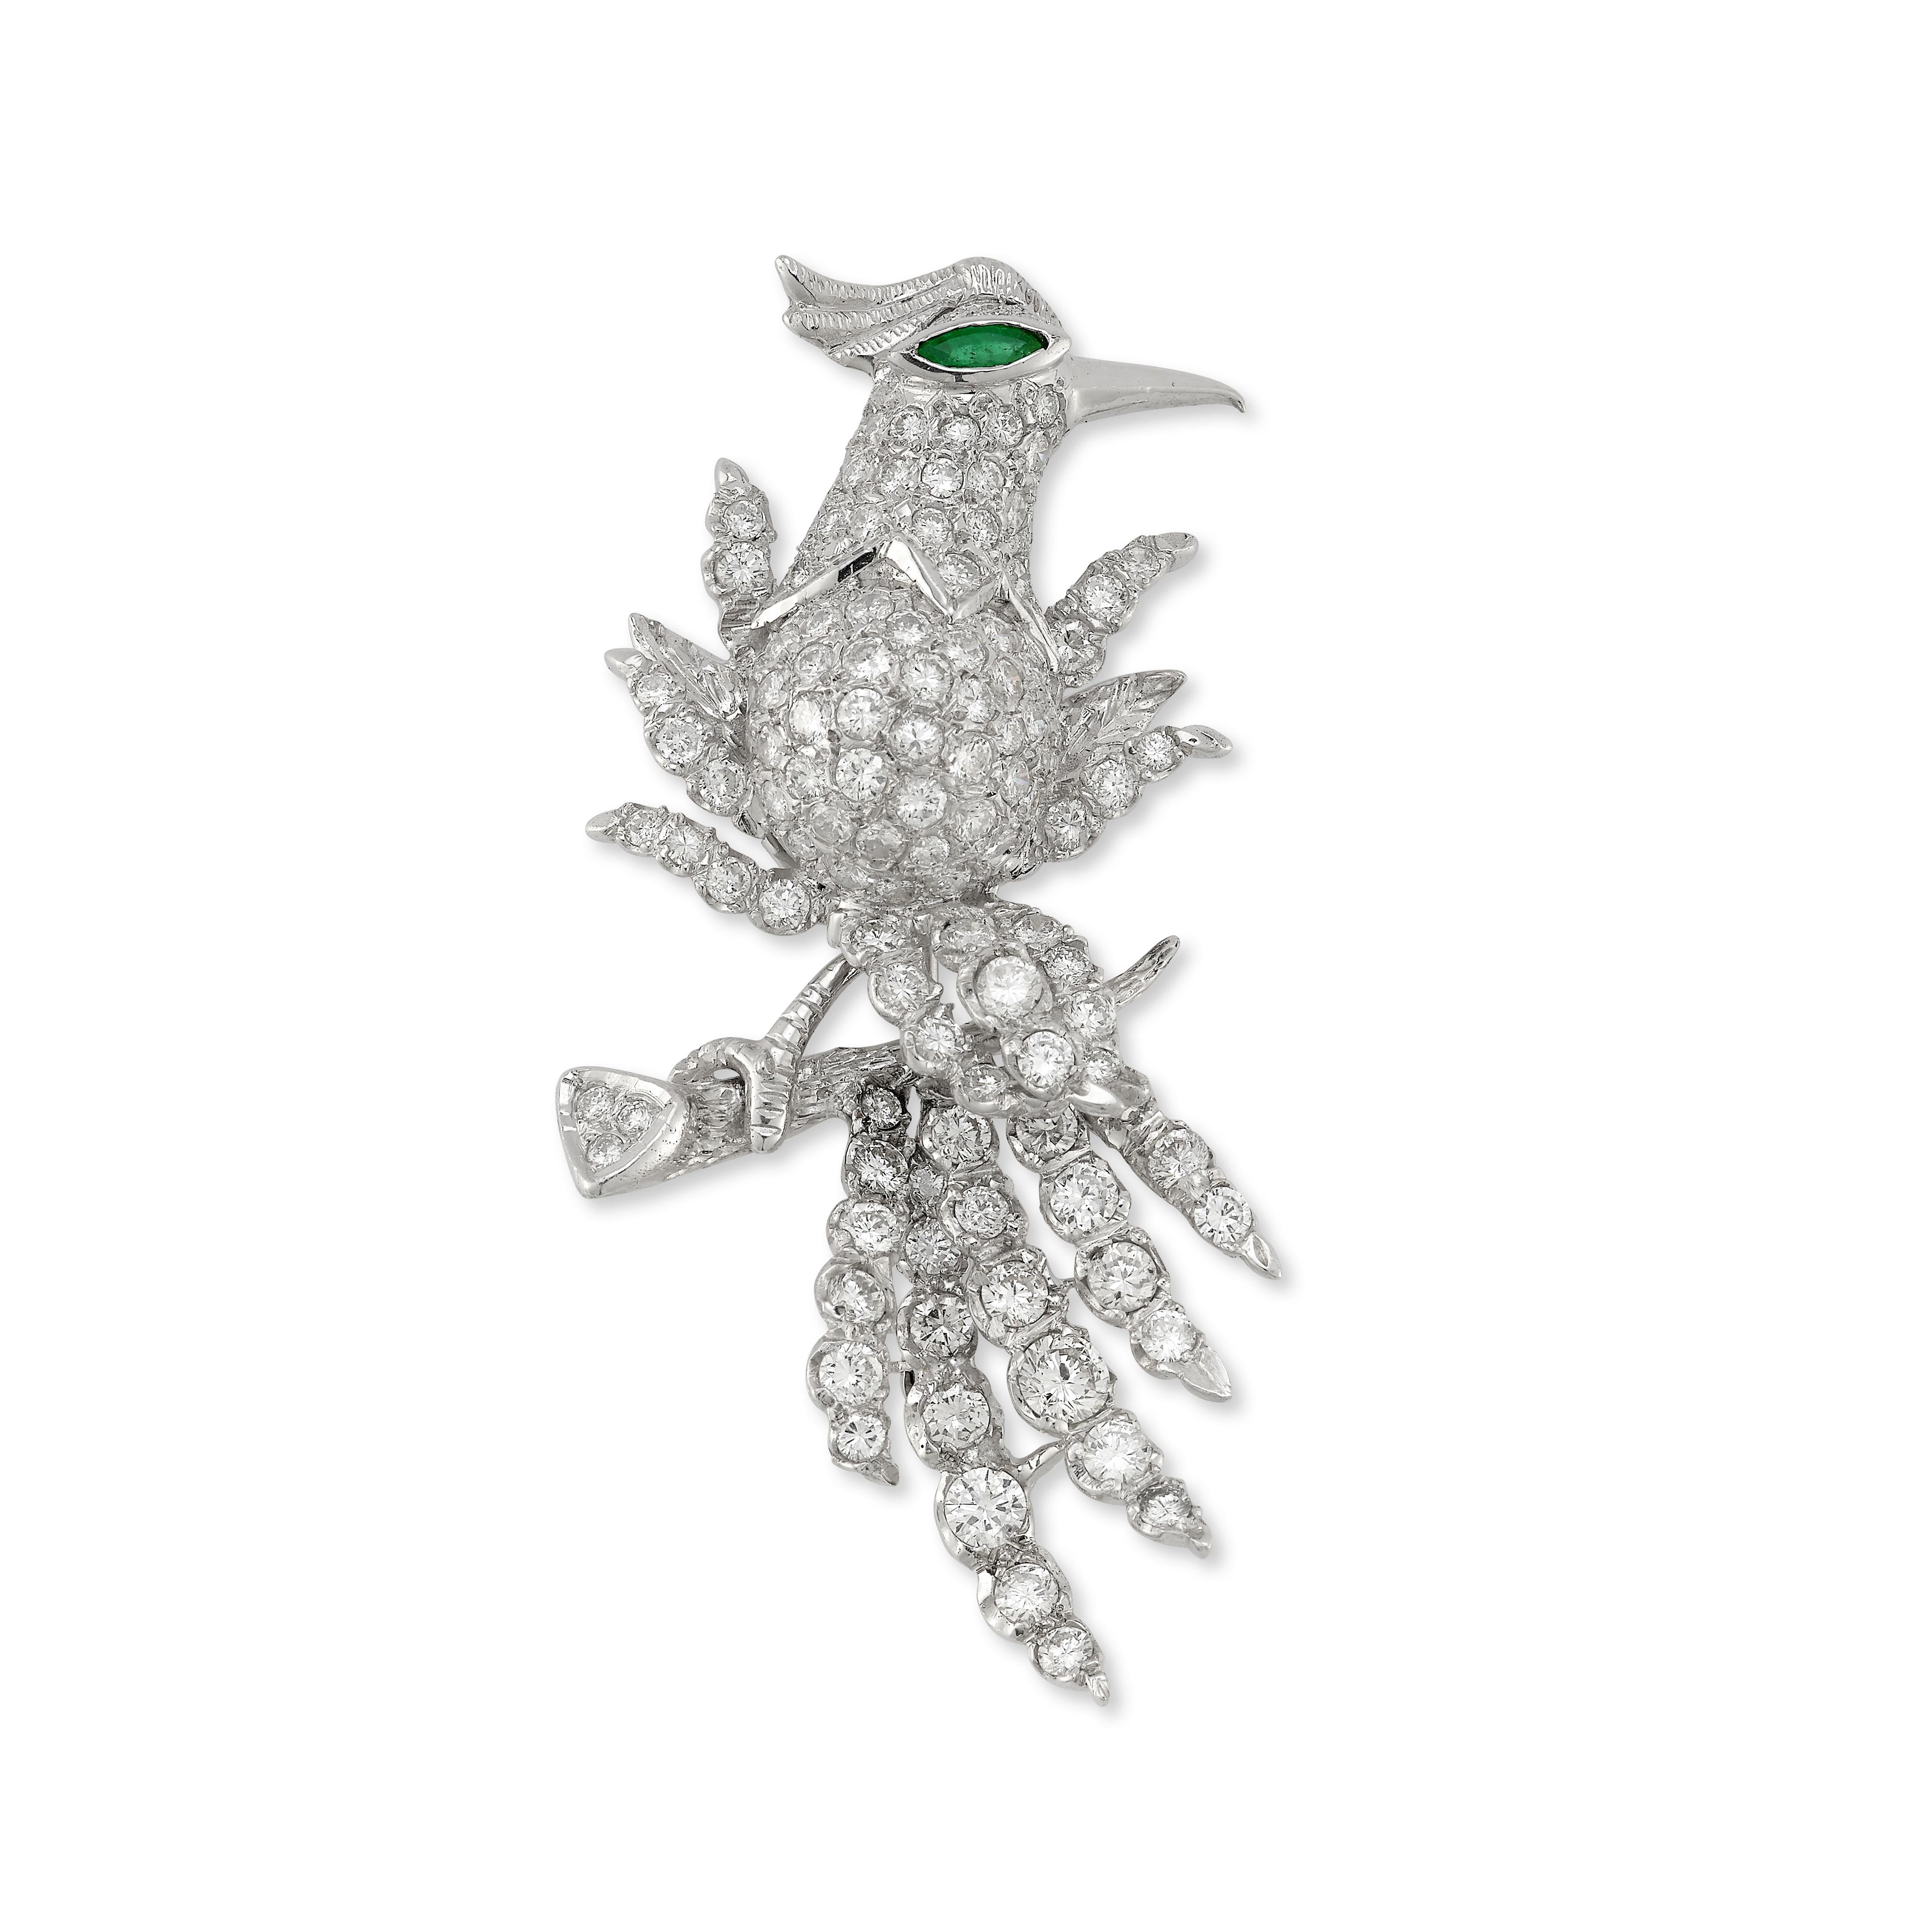 Diamond & Emerald Bird Brooch 

White gold brooch set with 113 round diamonds weighing approximately 7.28 carats in the shape of a bird of paradise with an emerald eye perched on a branch

Length: 2.63 in

14 karat gold